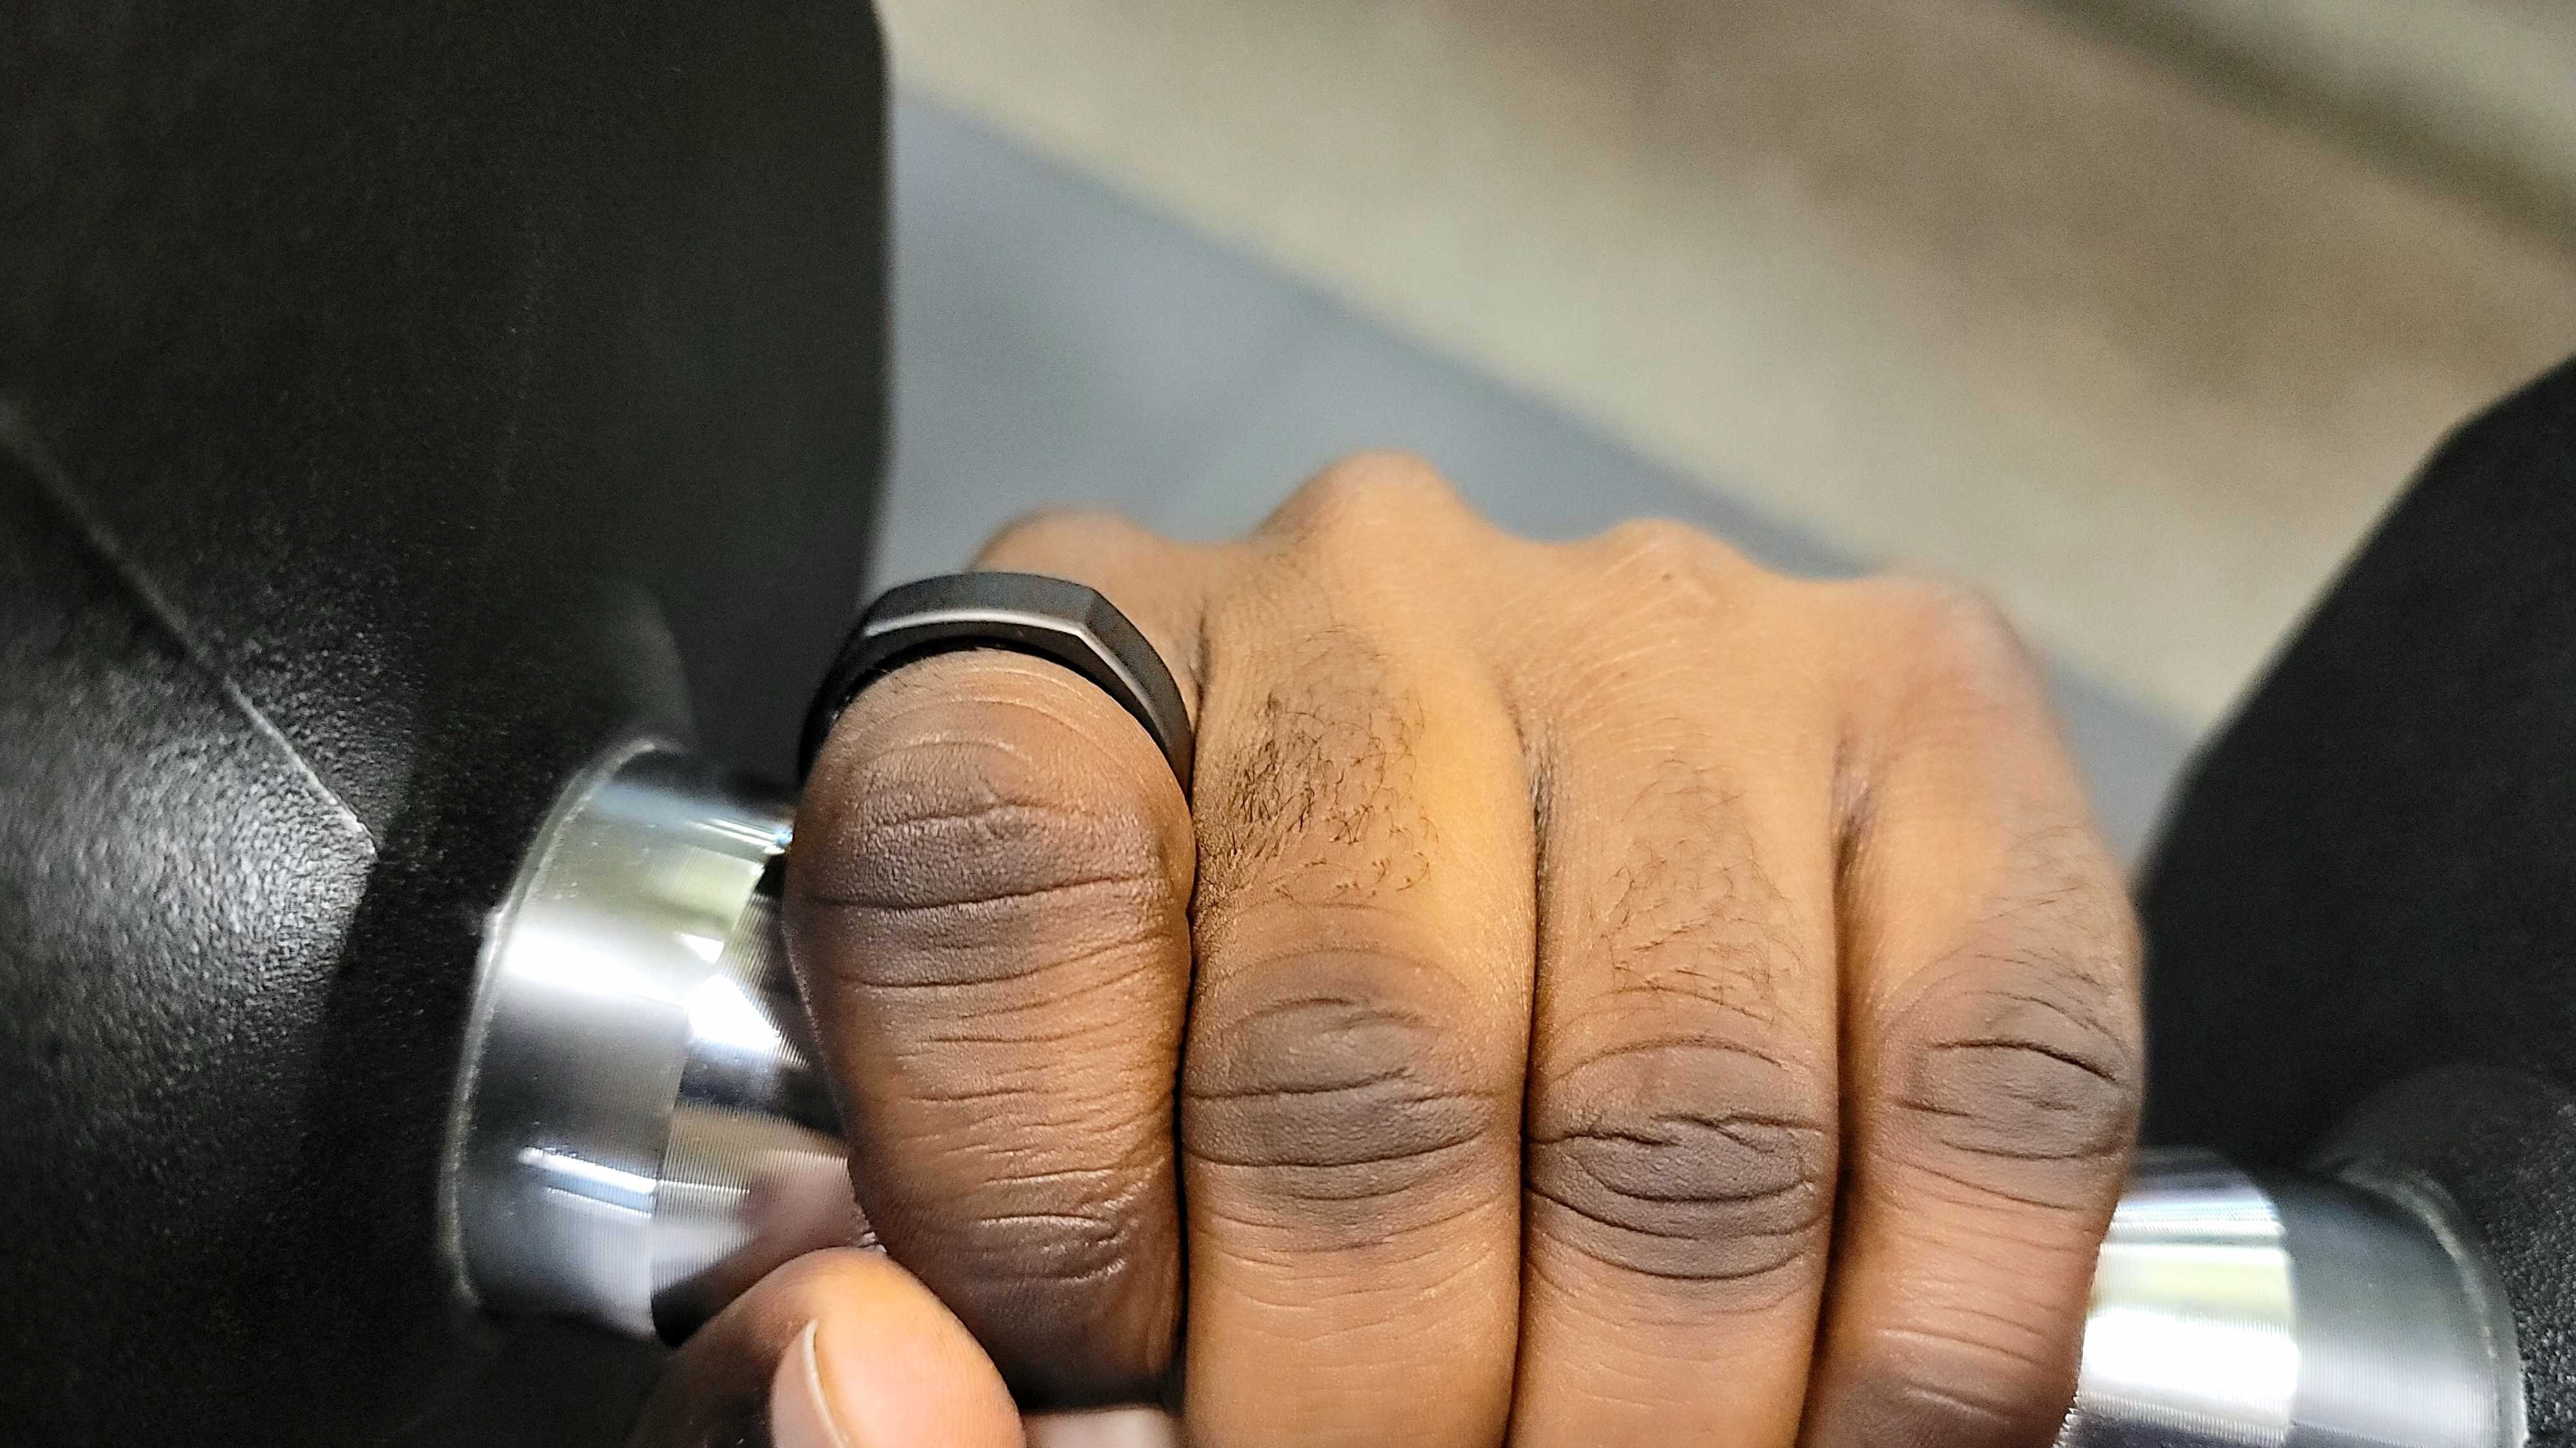 Wearing the Oura Ring Gen 3 while weightlifting